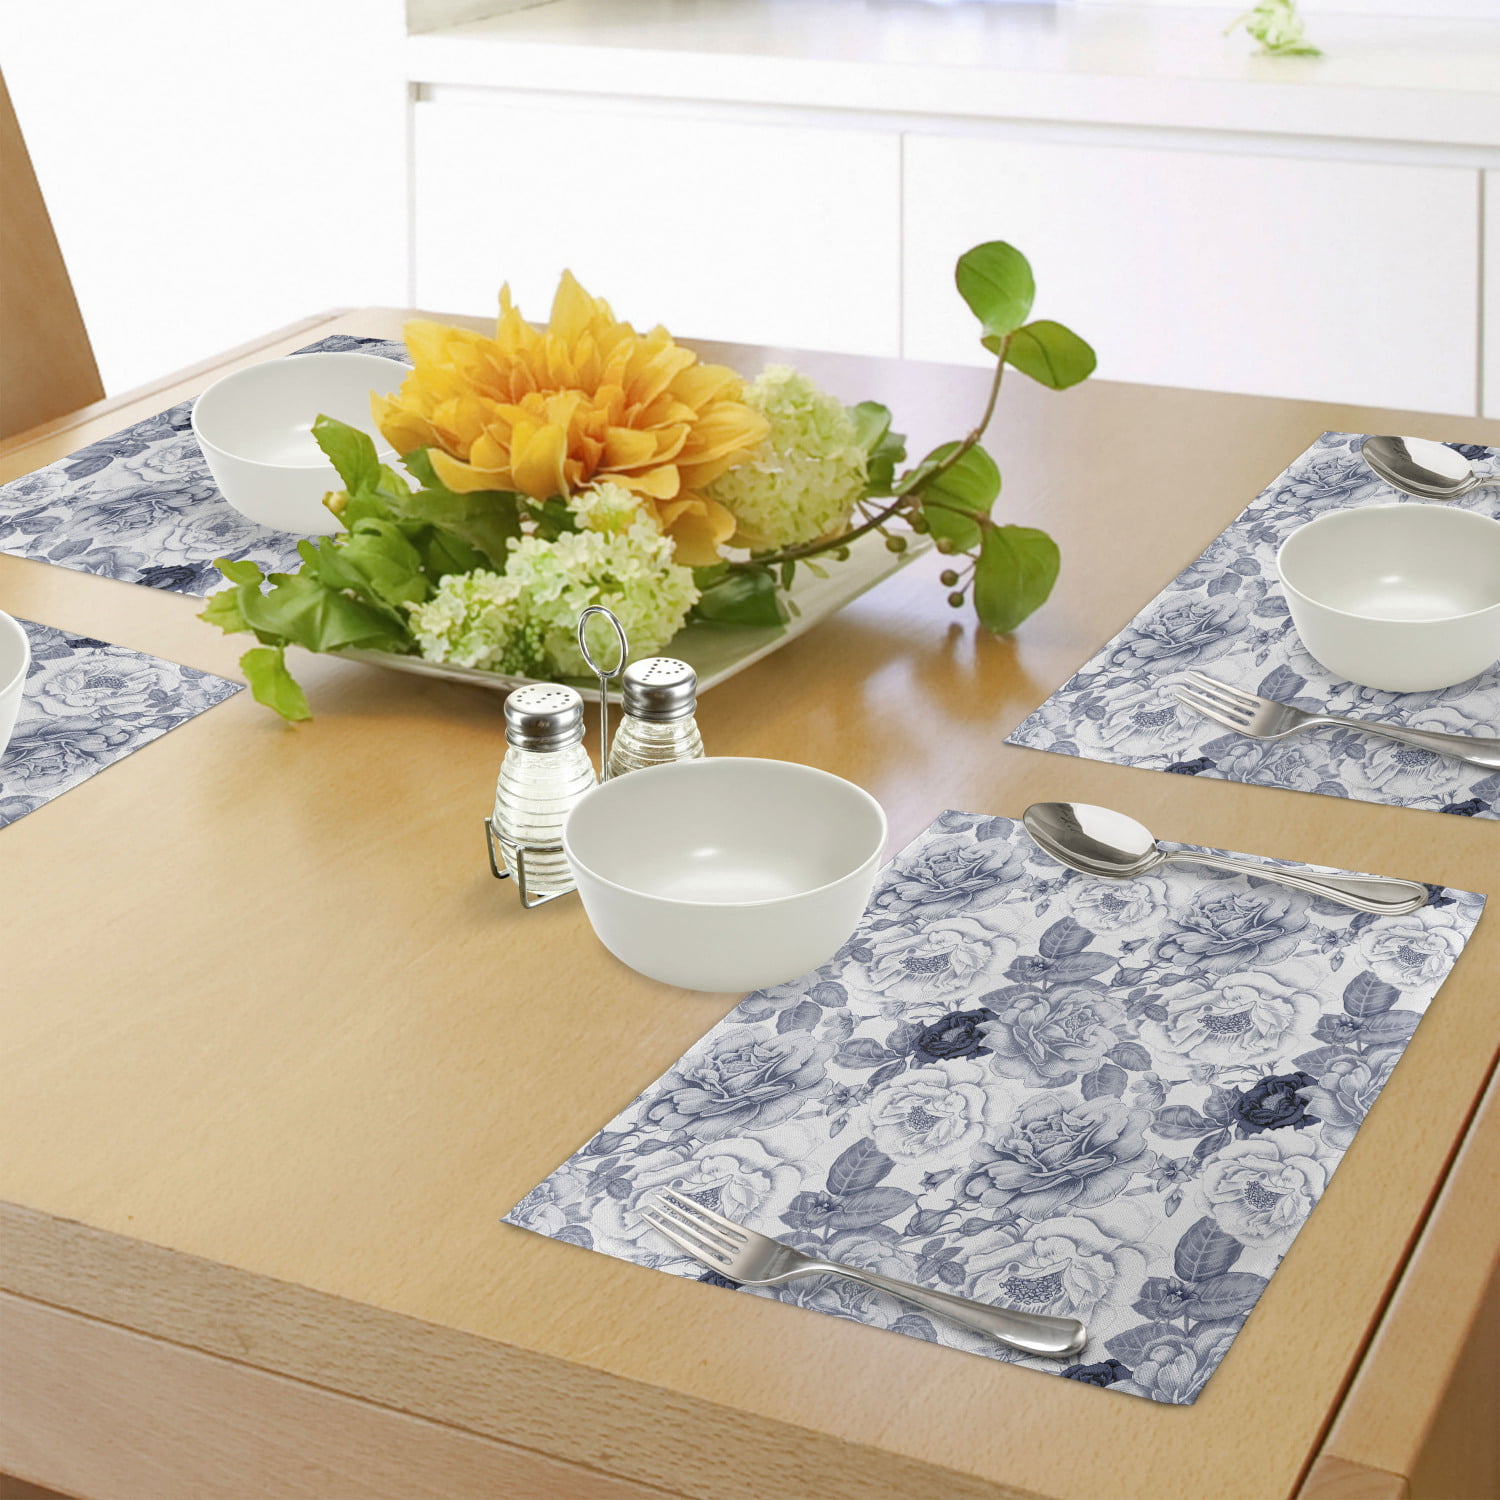 Country Home Set of 4 Floral Home Placemats Square Shabby Chic Cork Table Mats 